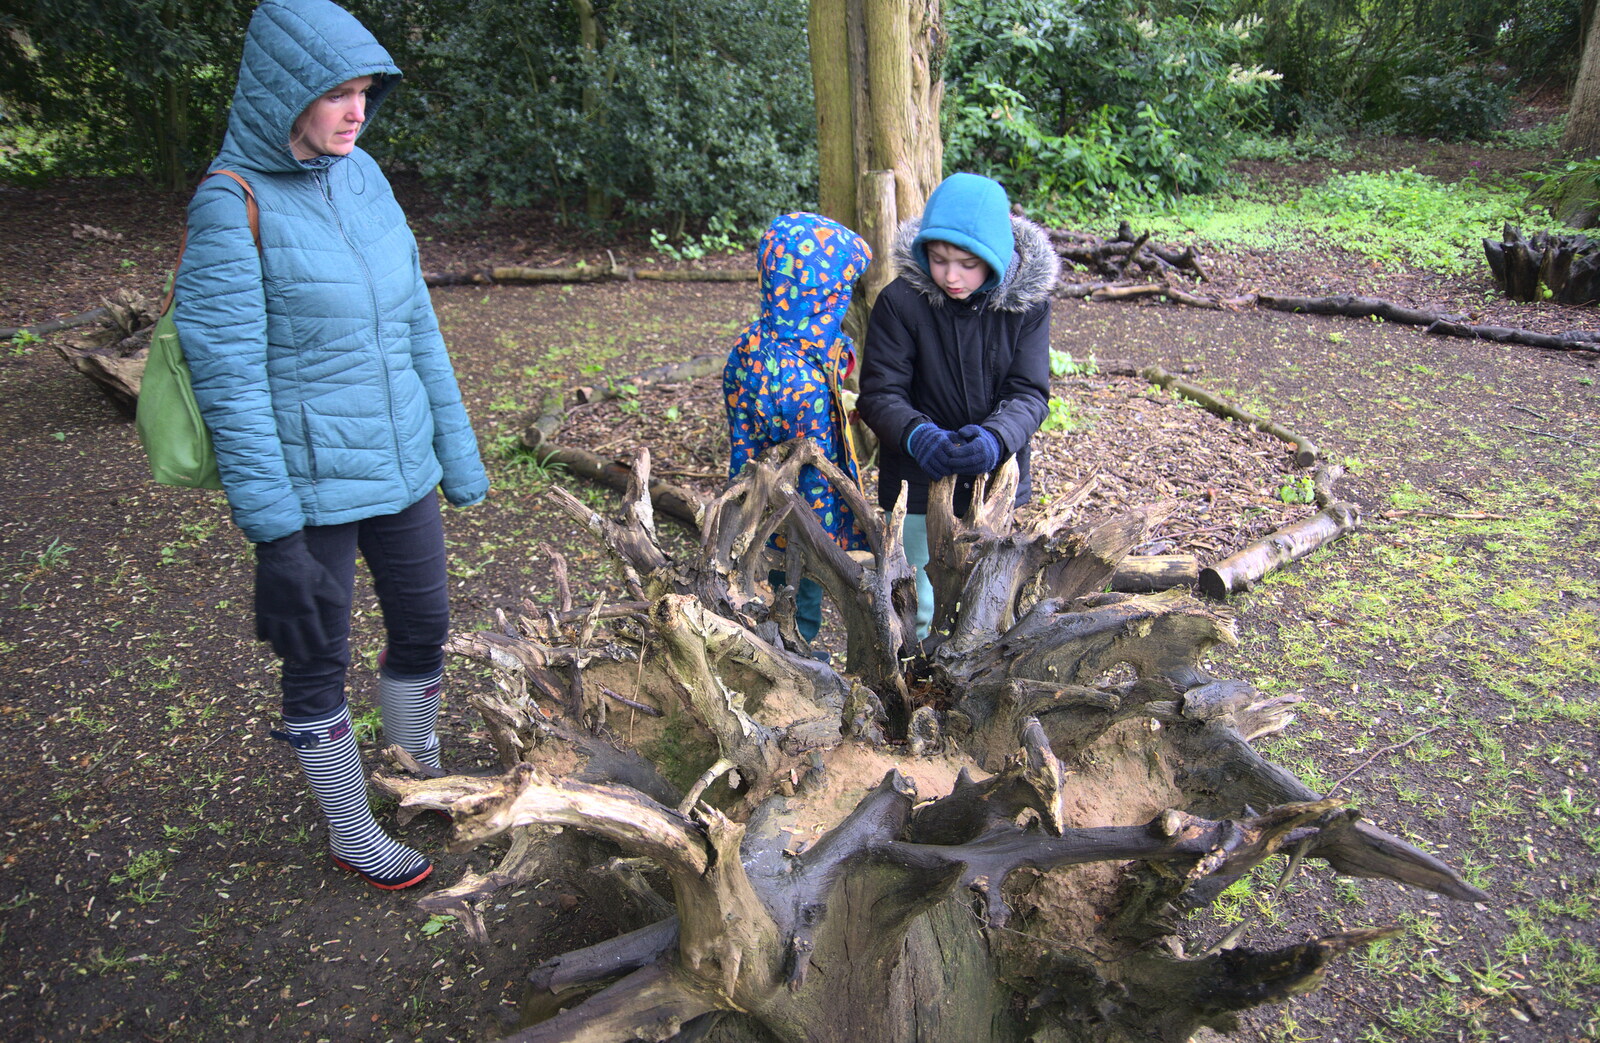 The boys poke around in a stumpery from A Trip to Blickling Hall, Aylsham, Norfolk - 29th April 2018